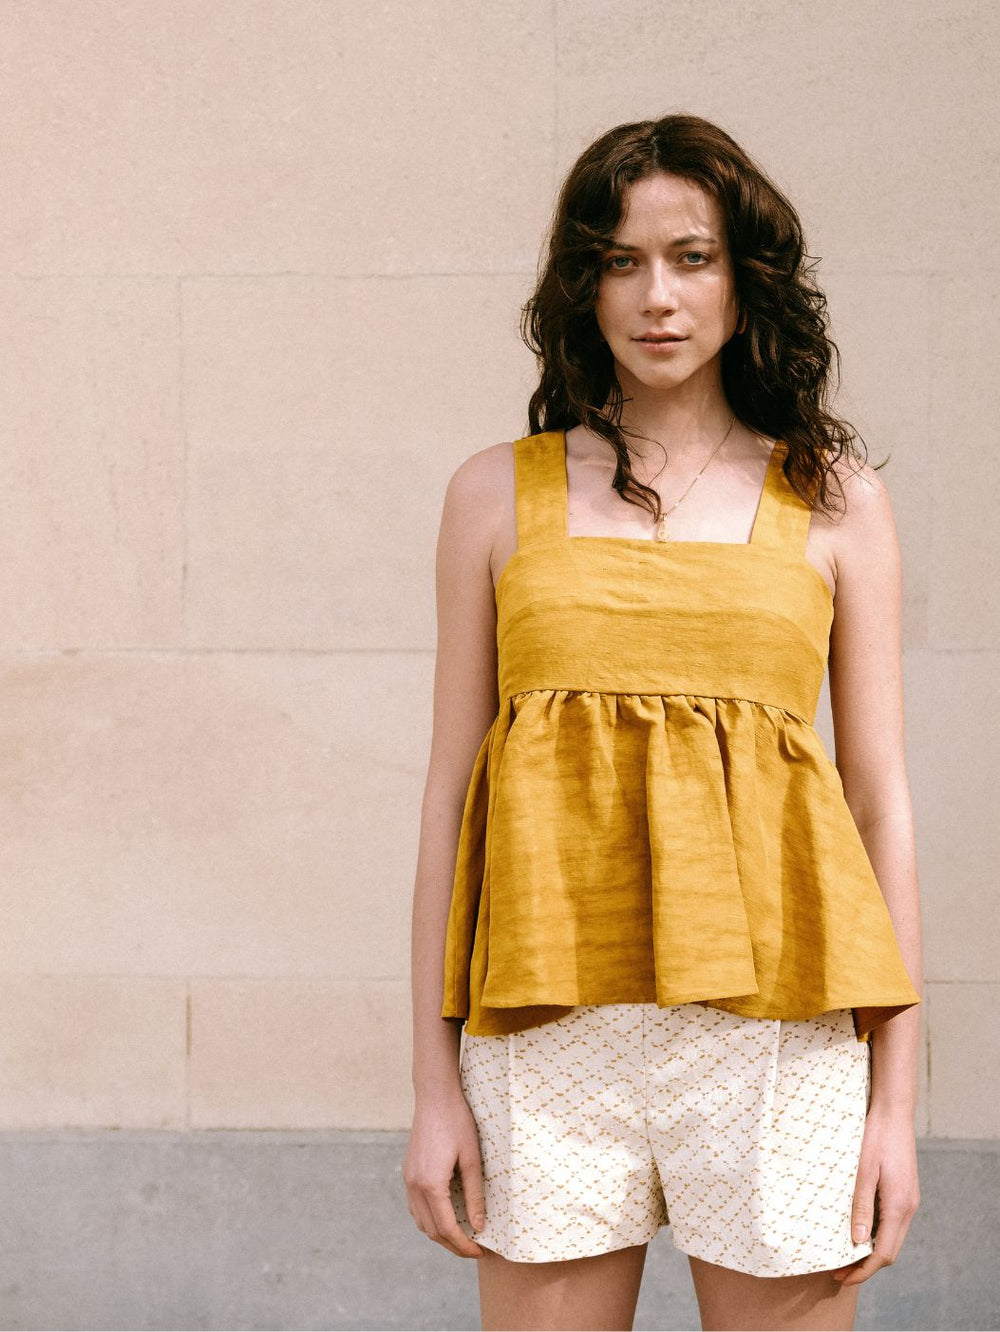 Woman wearing the Kaiko Top sewing pattern from Notches on The Fold Line. A sleeveless top pattern made in cotton, viscose, chiffon, embroidery, jacquard, or denim fabric, featuring wide straps, a square neckline, and gathered peplum.